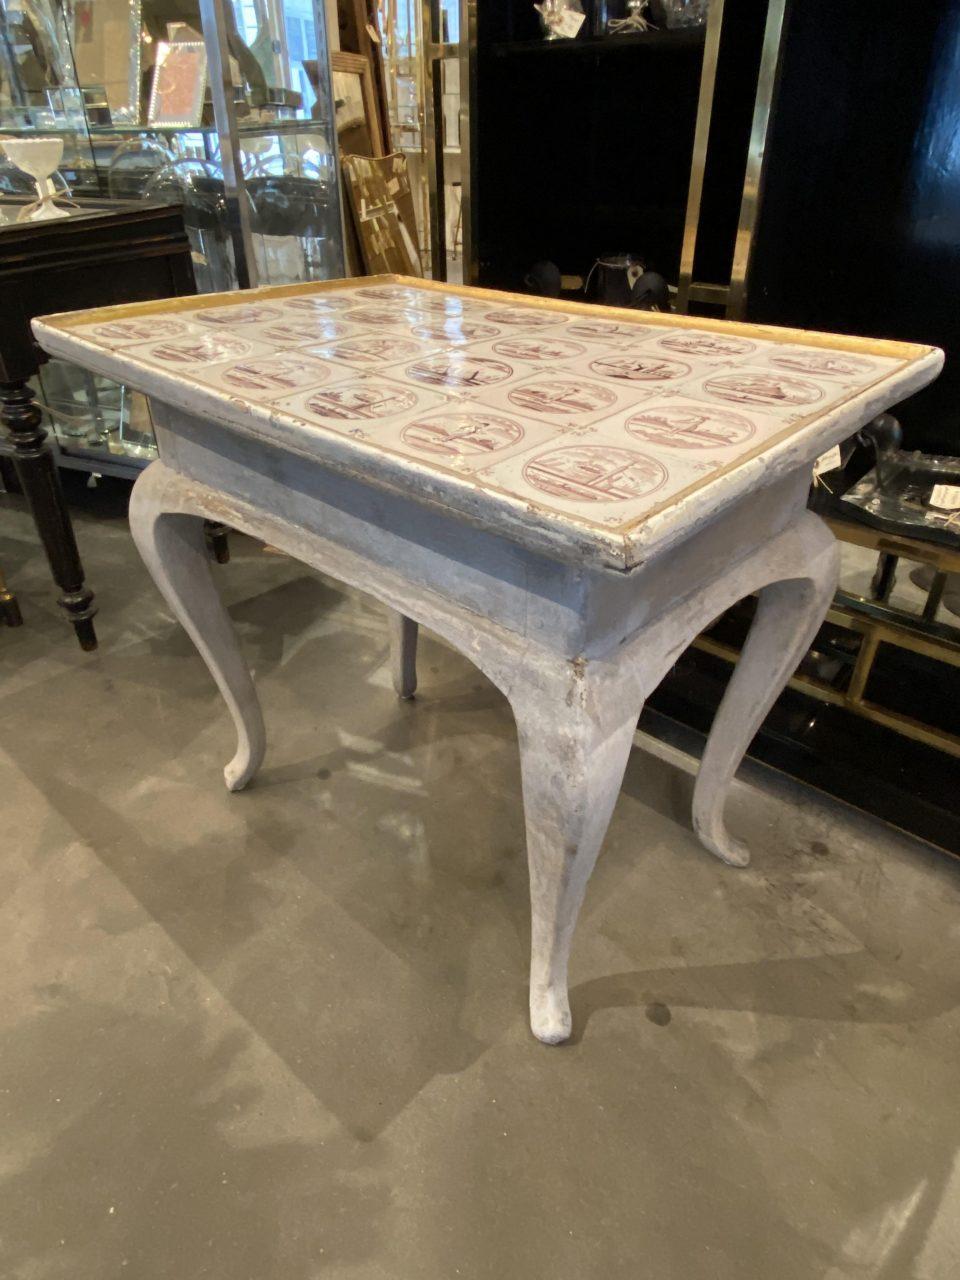 Antique tile top table, with Dutch tiles, dated around 1800. Roccoco style elegant curved legs, and a wonderful palest grey paint with gilt edging. Aubergine and white tiles. Pretty patina.